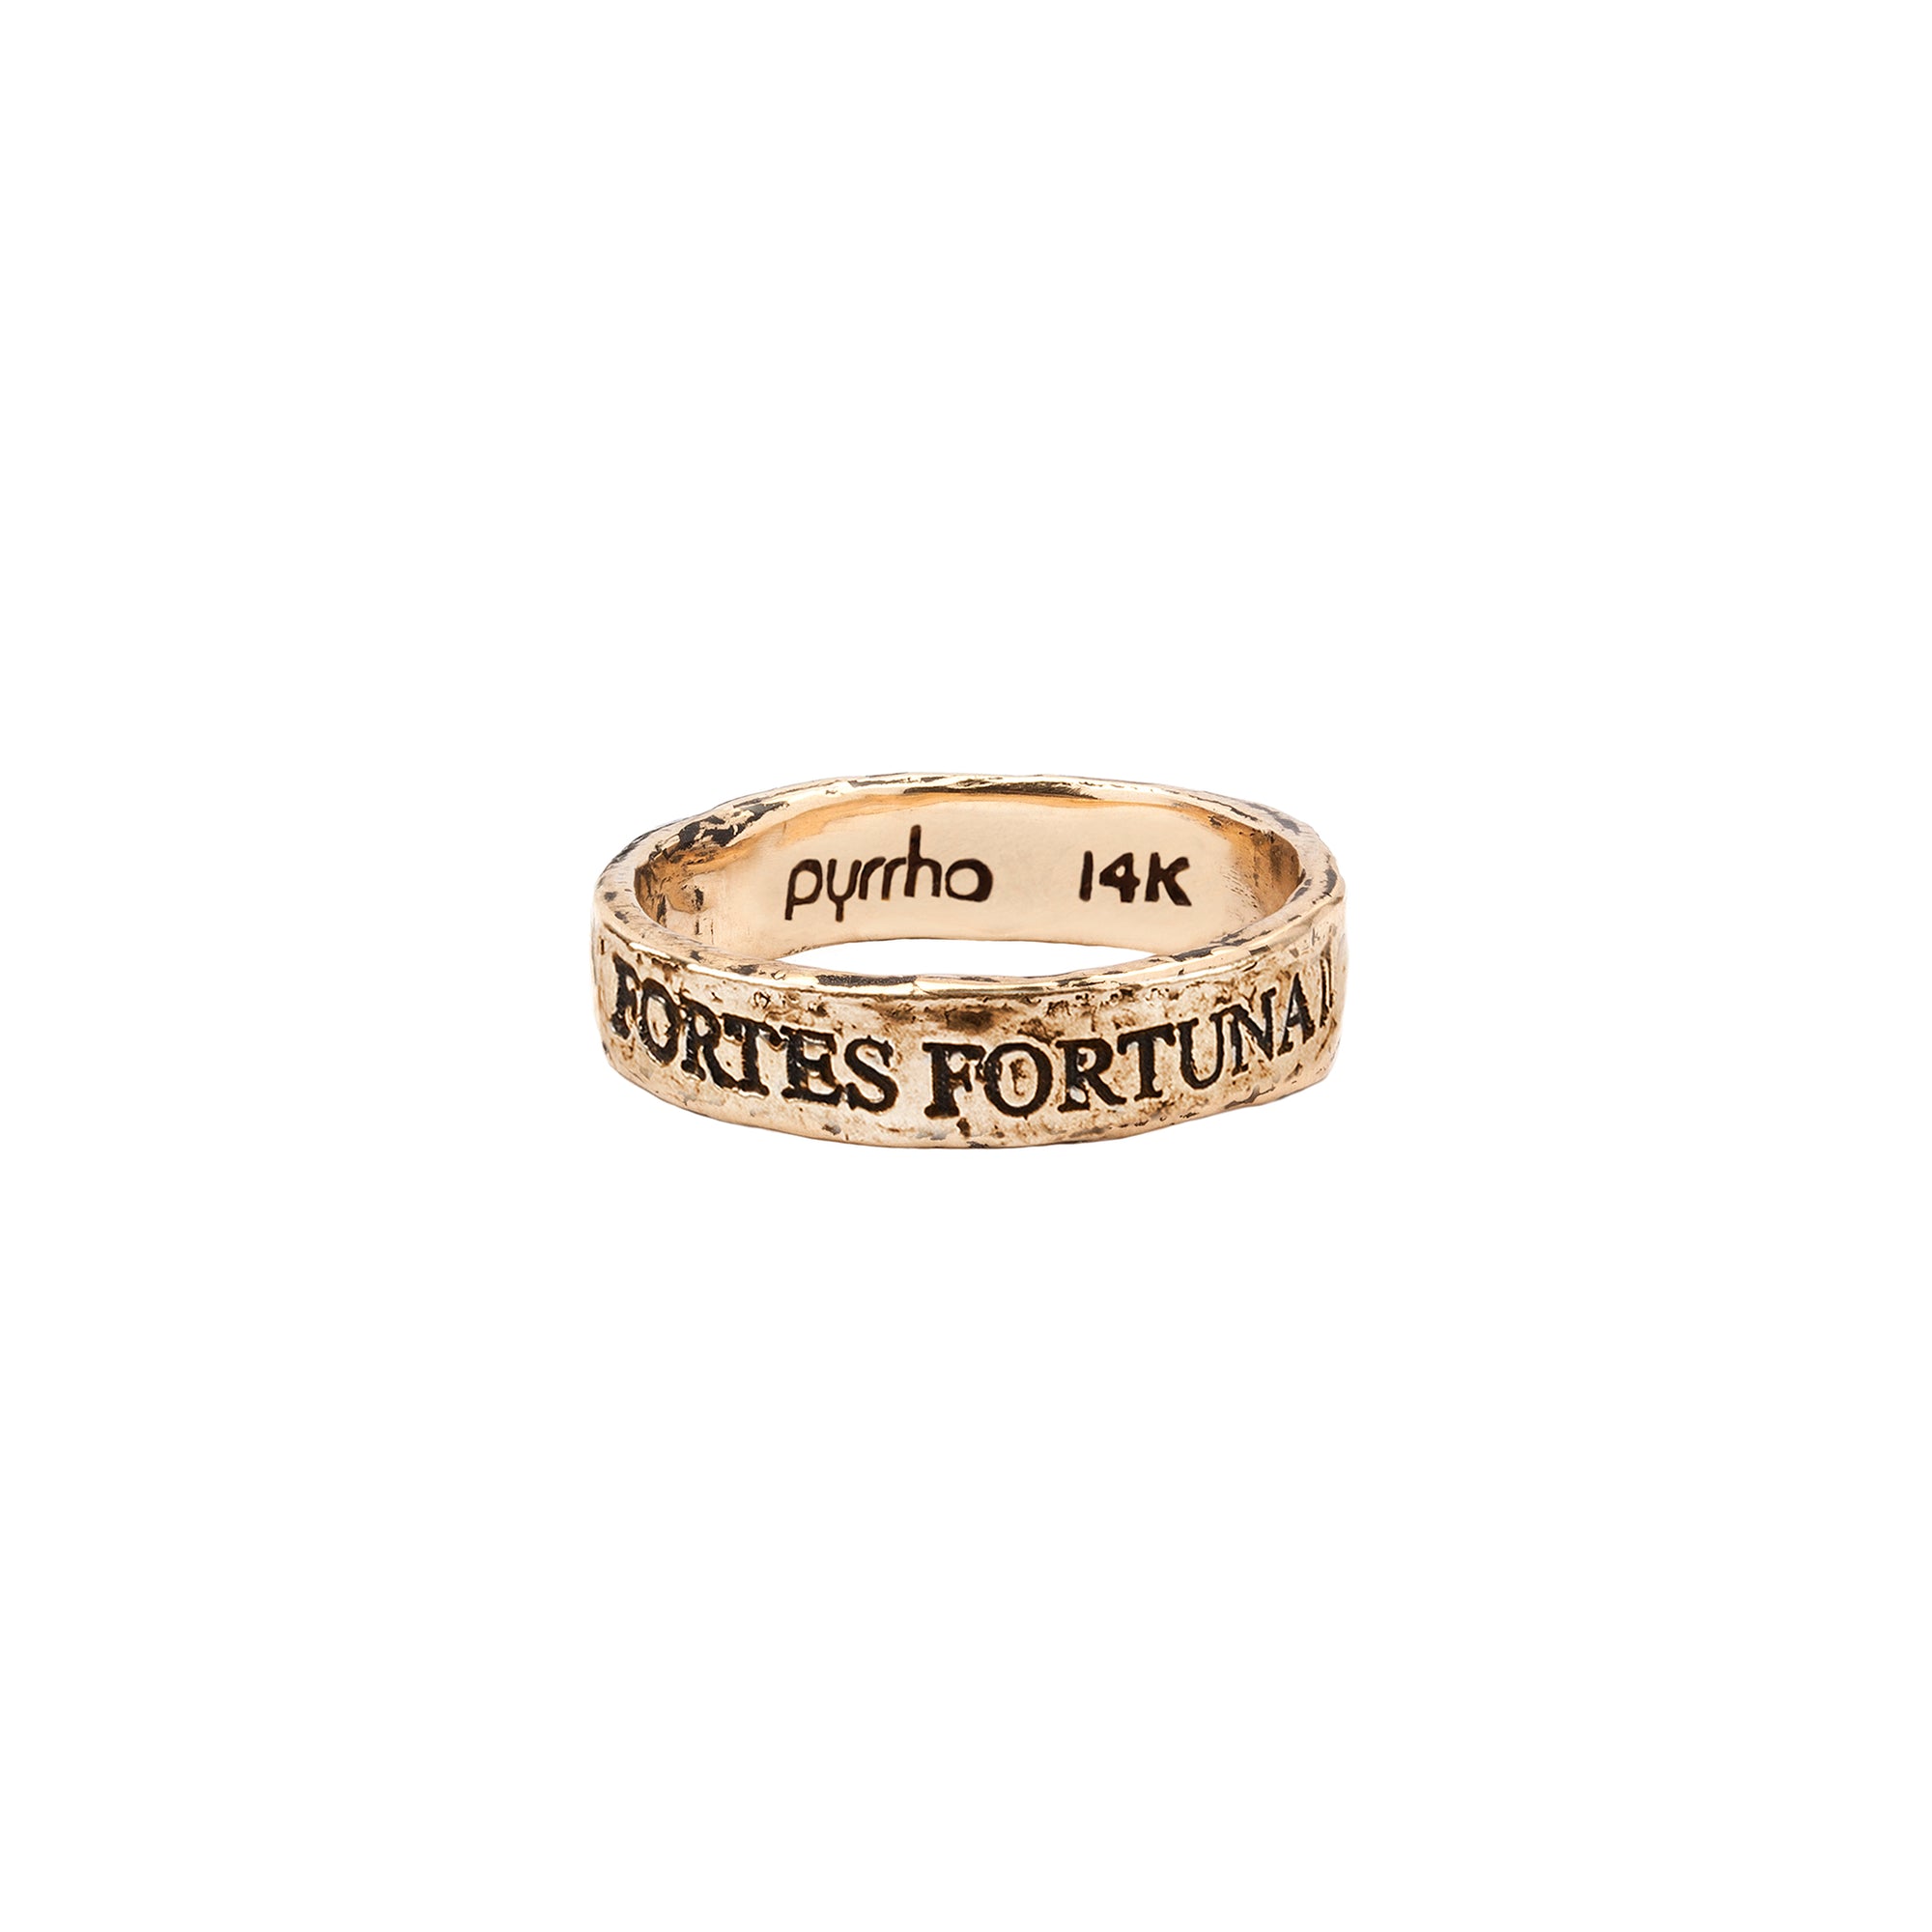 A 14k gold ring engraved with our Fortes Fortuna Luvat motto.